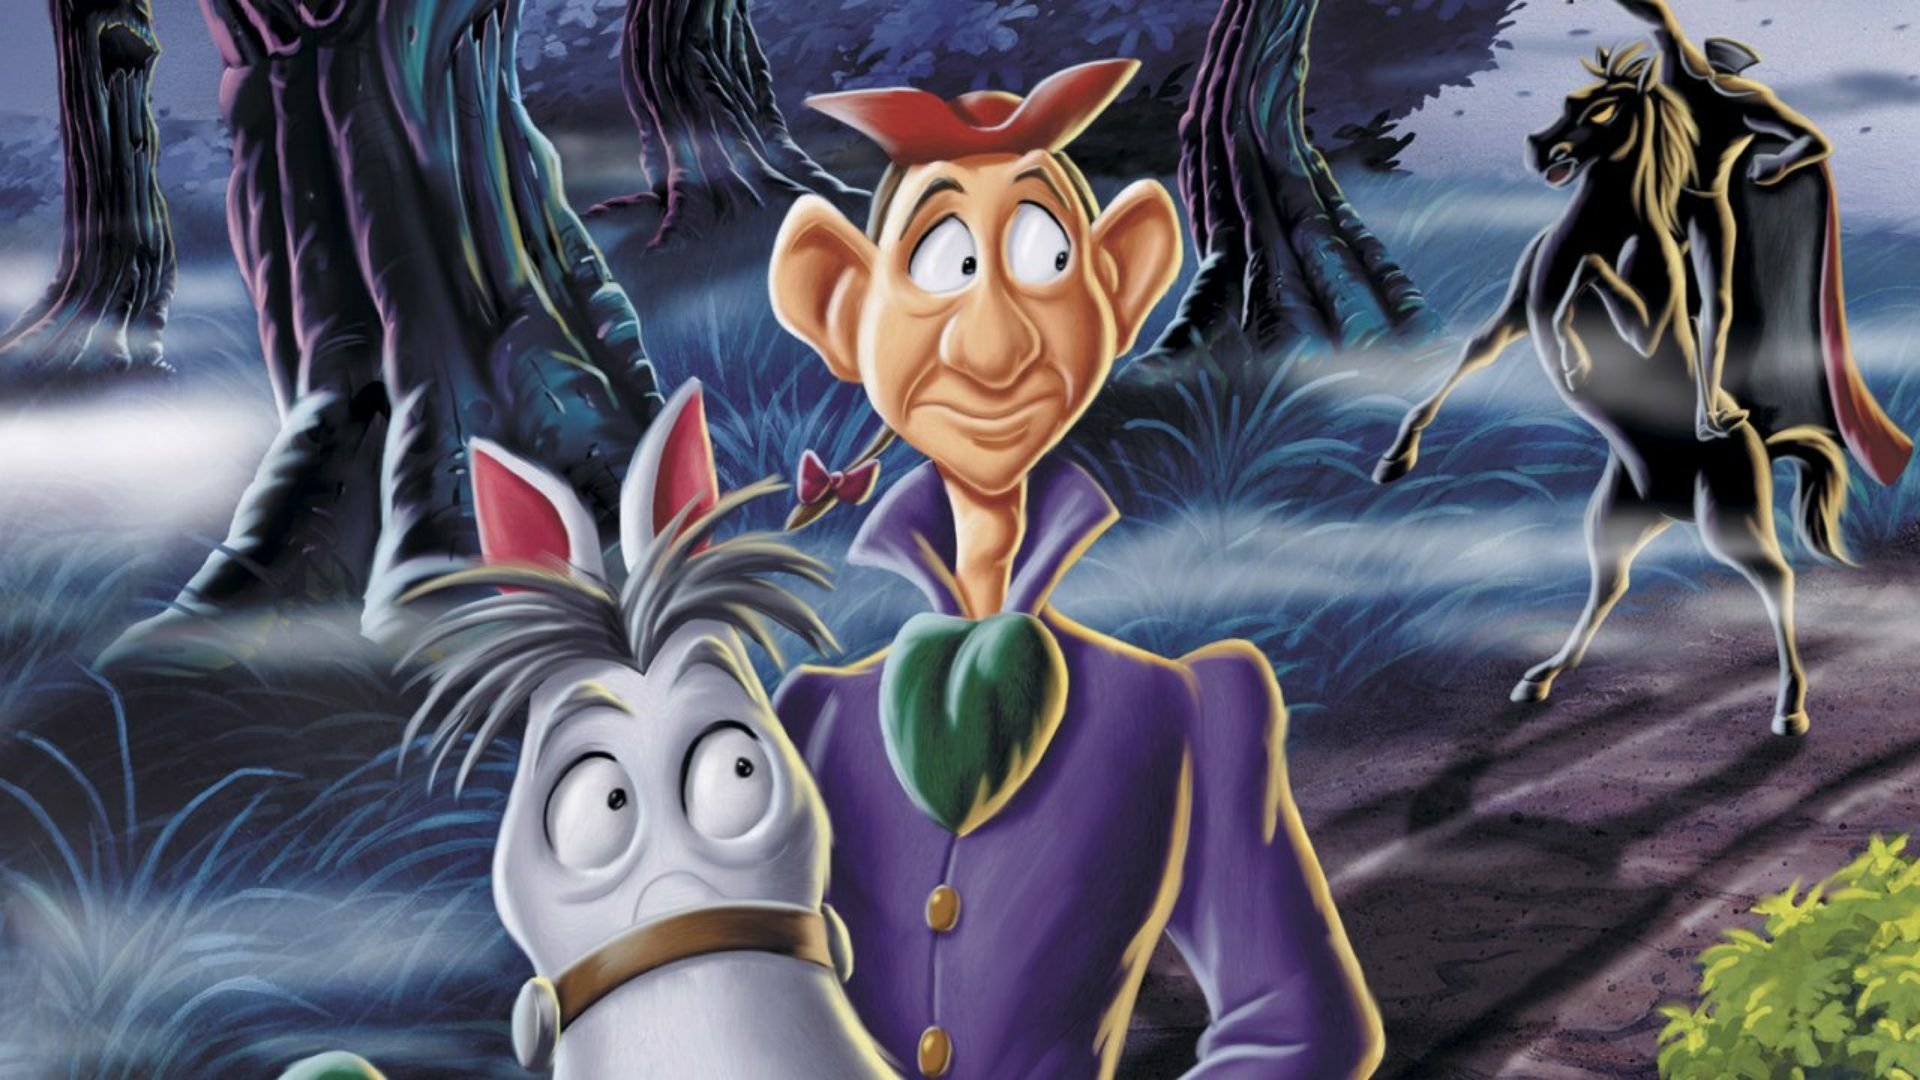 8. The Adventures of Ichabod and Mr. Toad - wide 8